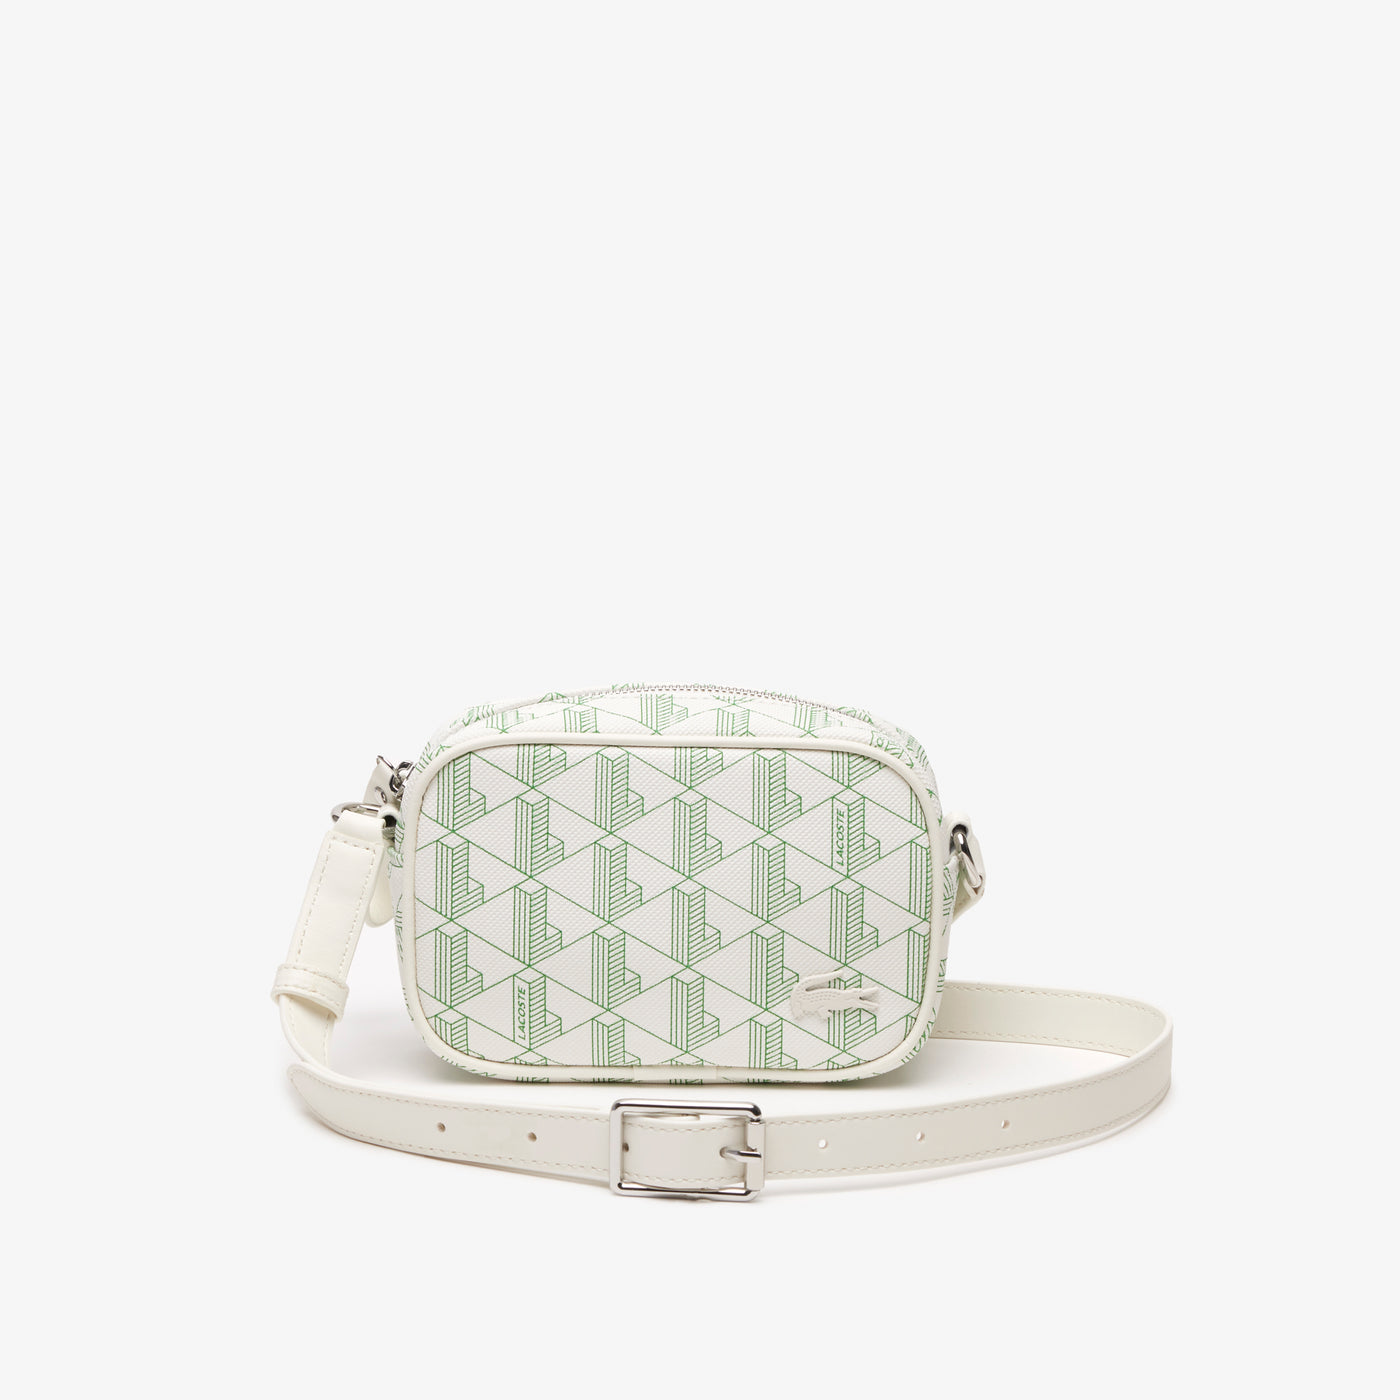 Lacoste Women's Monogram Zip Crossover Bag - One Size In White